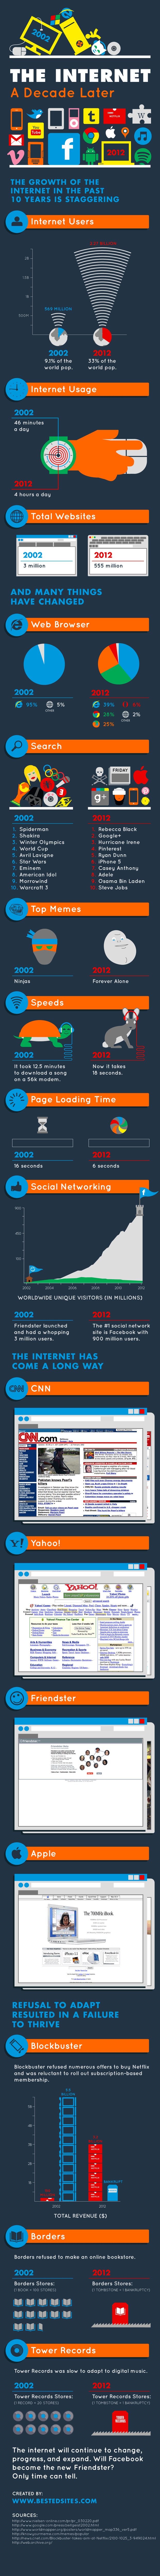 The Internet a Decade Later infographic